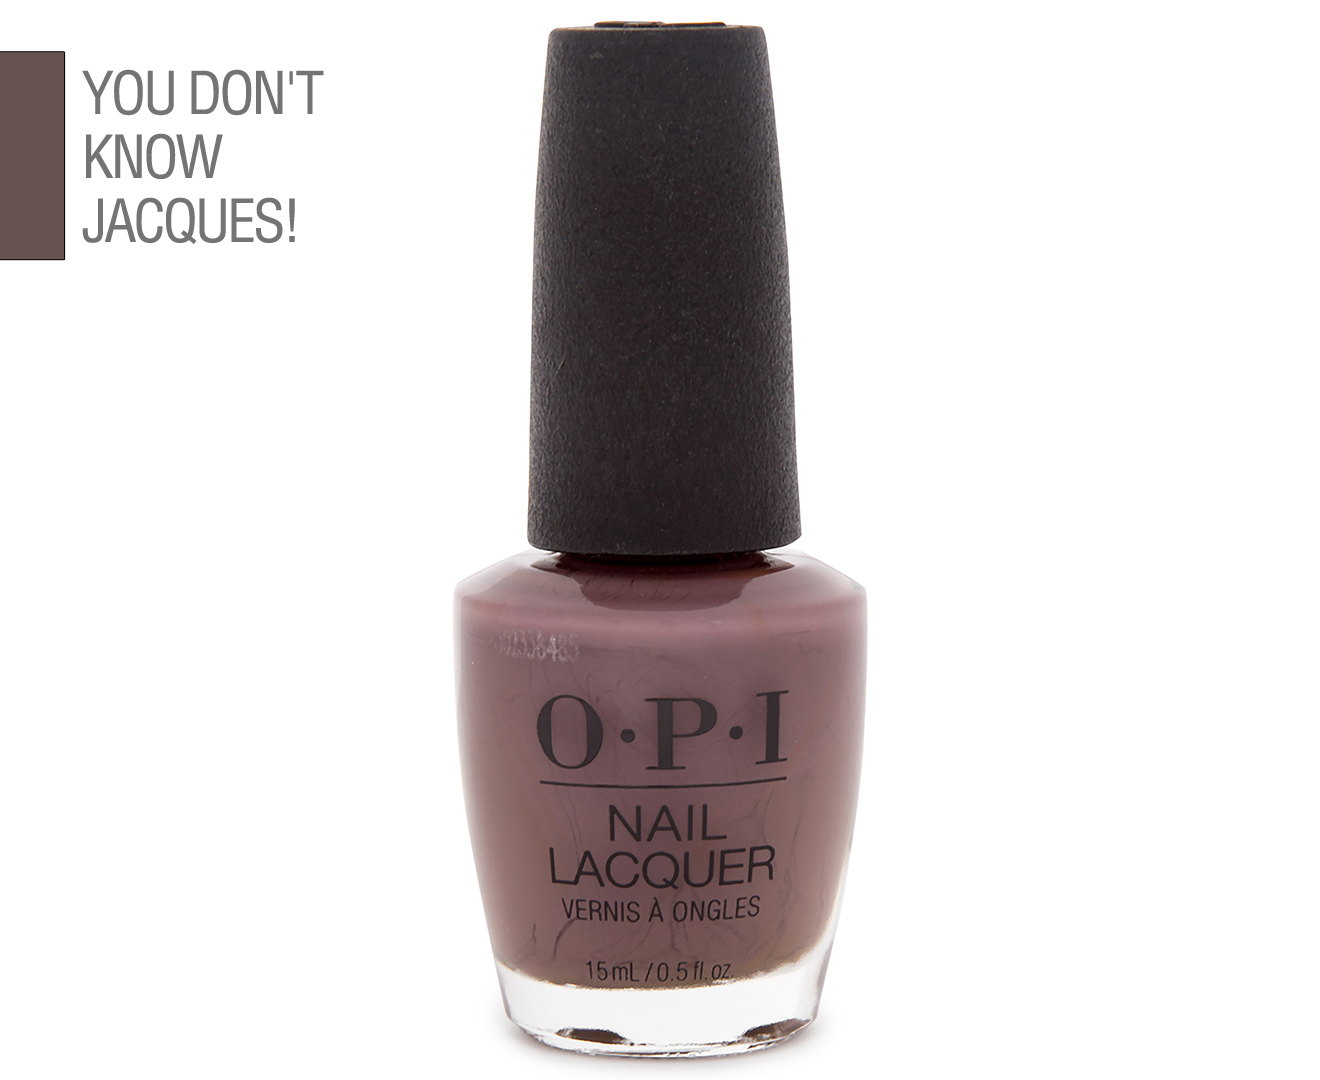 OPI Nail Lacquer, You Don't Know Jacques! - wide 3